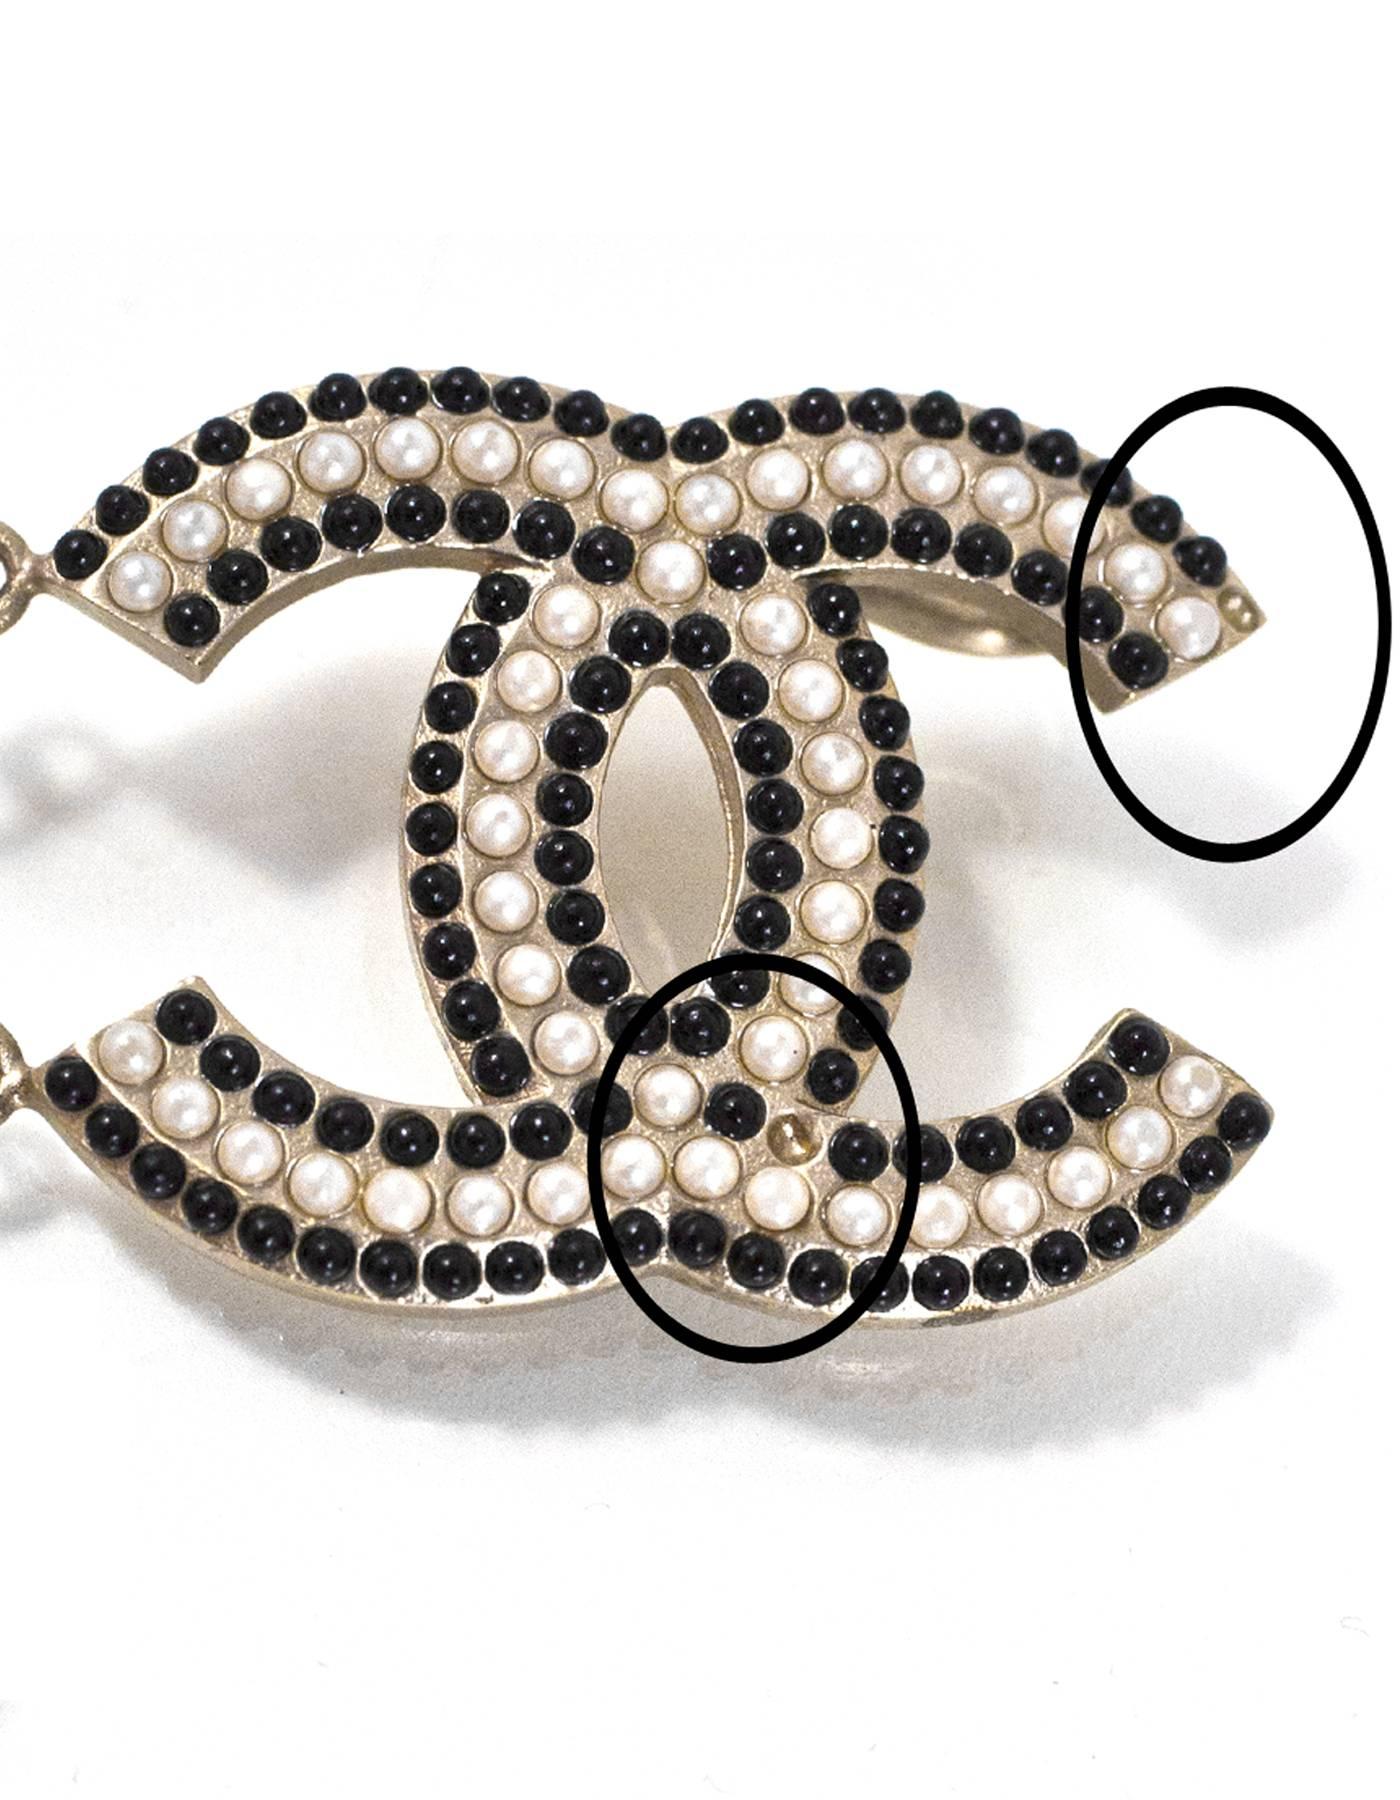 chanel belt with pearls